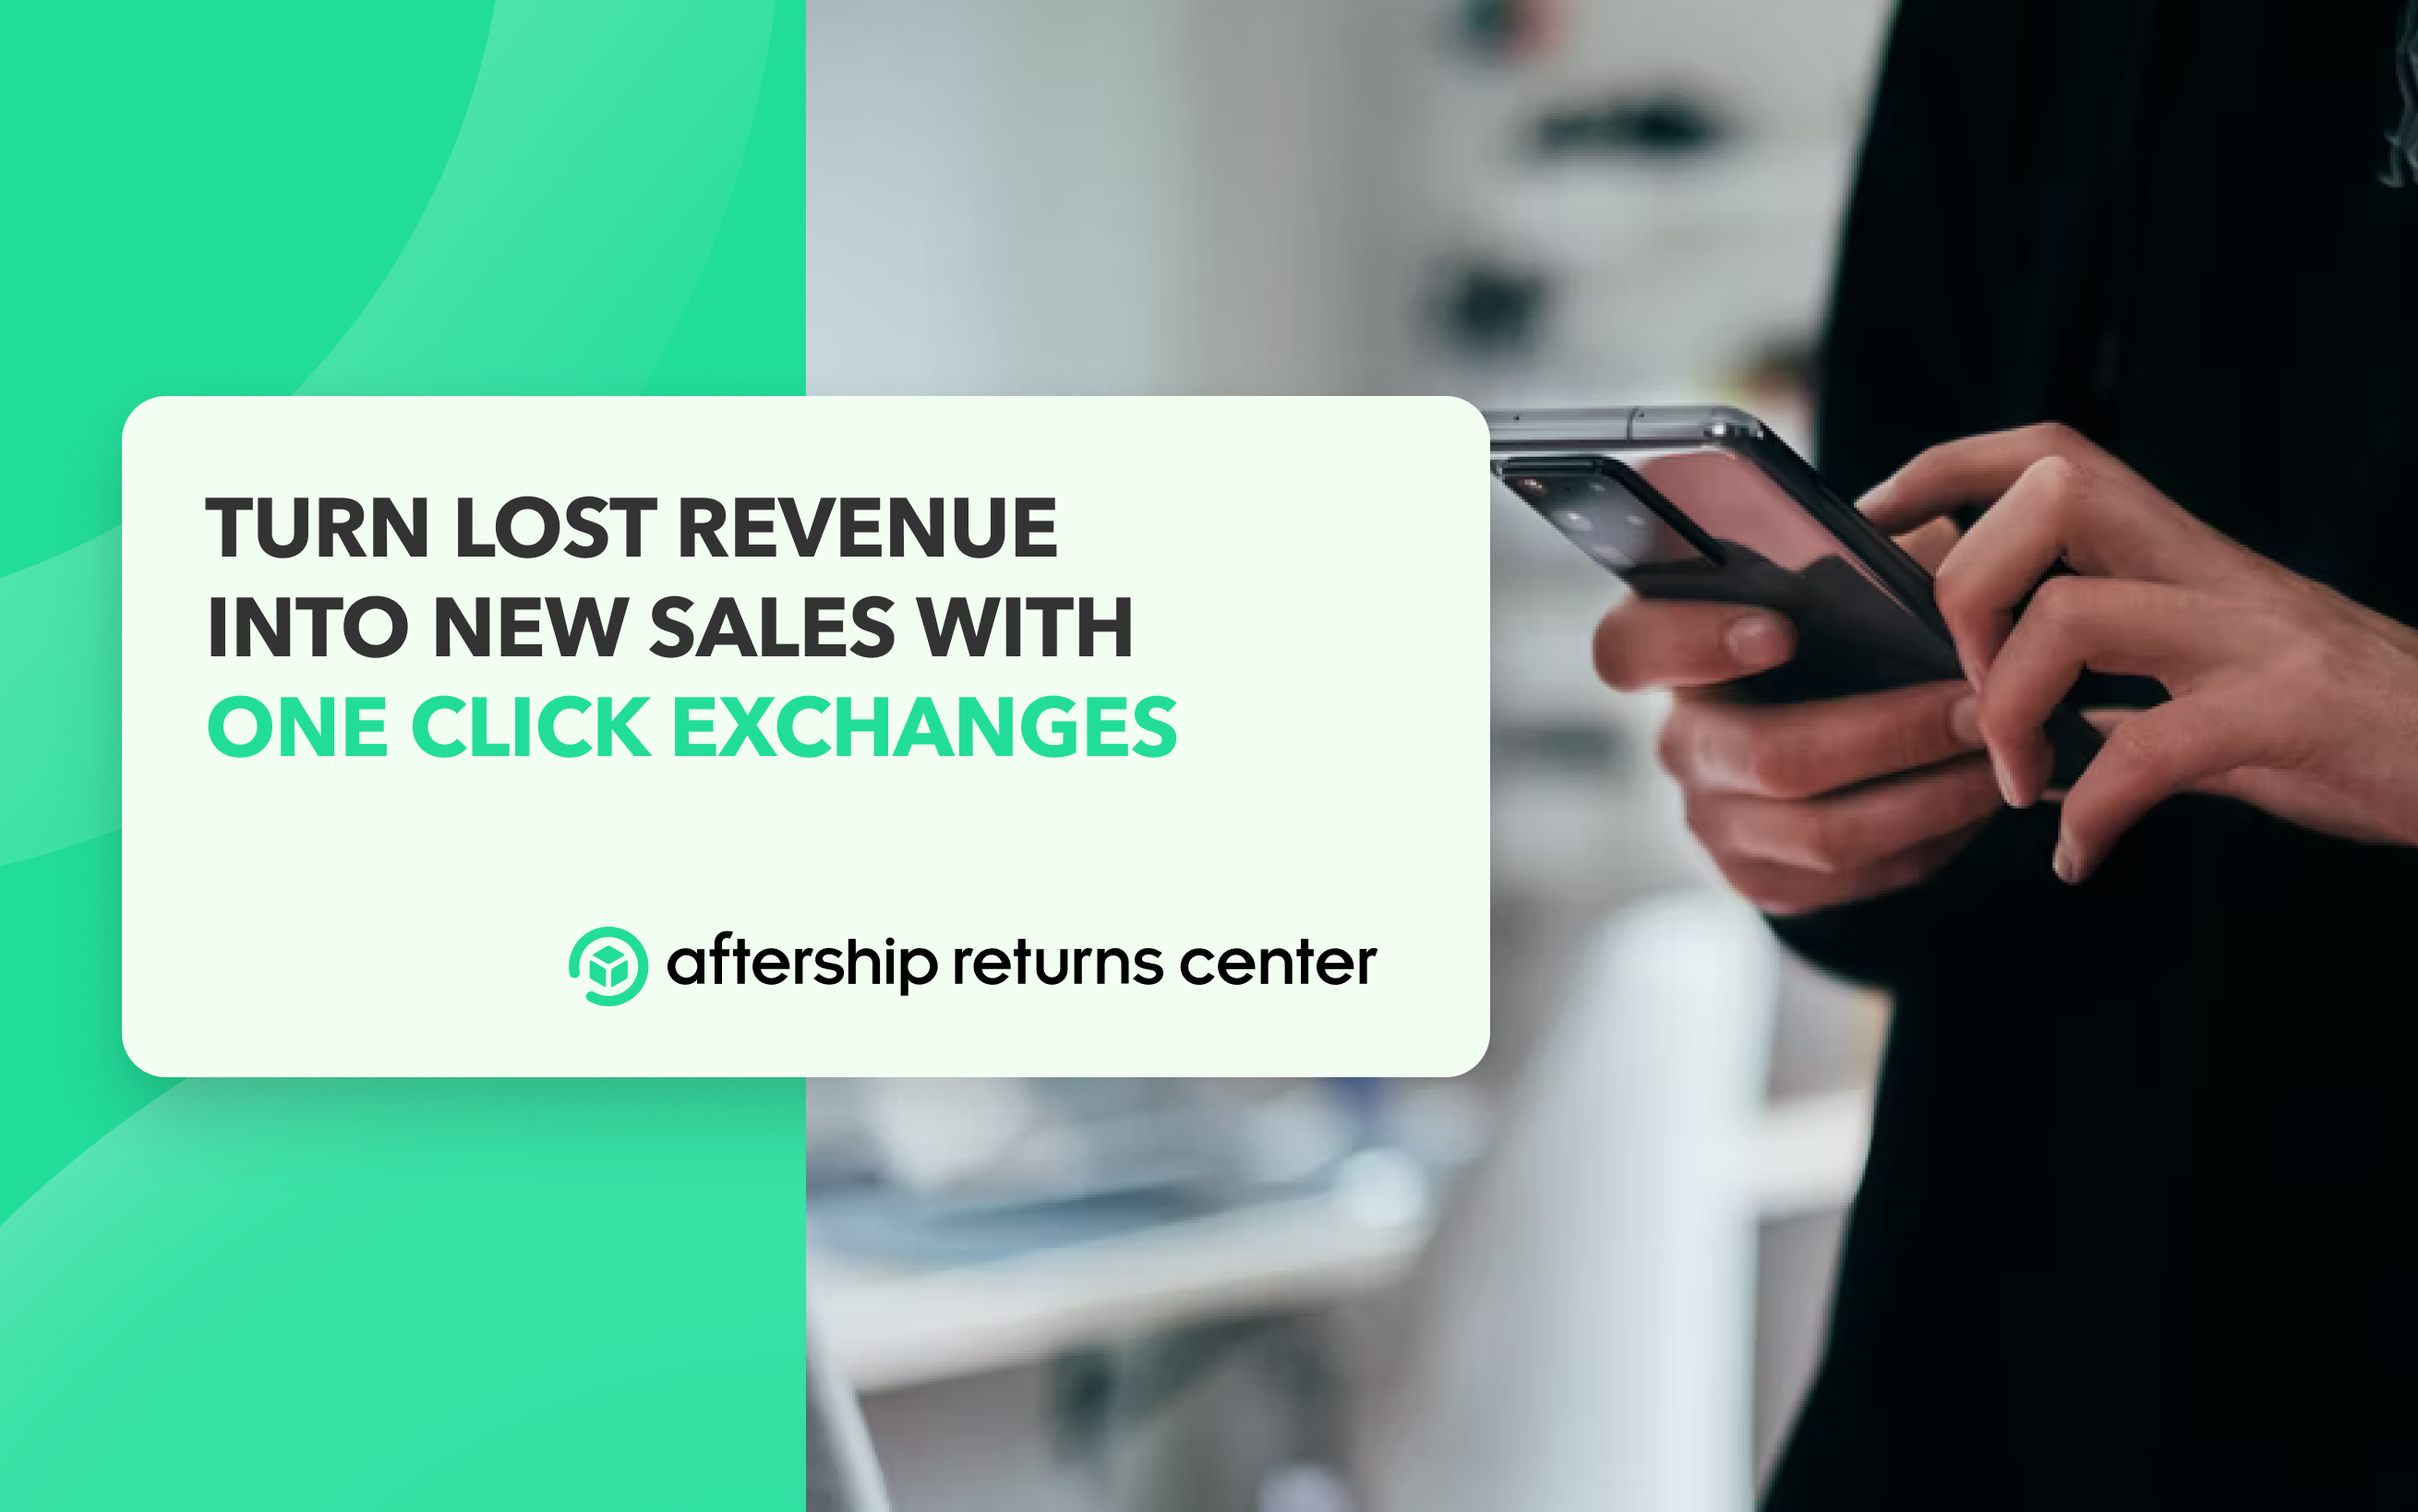 Maximize BFCM Retention by Turning “Refunds” Into "Exchange for Anything"